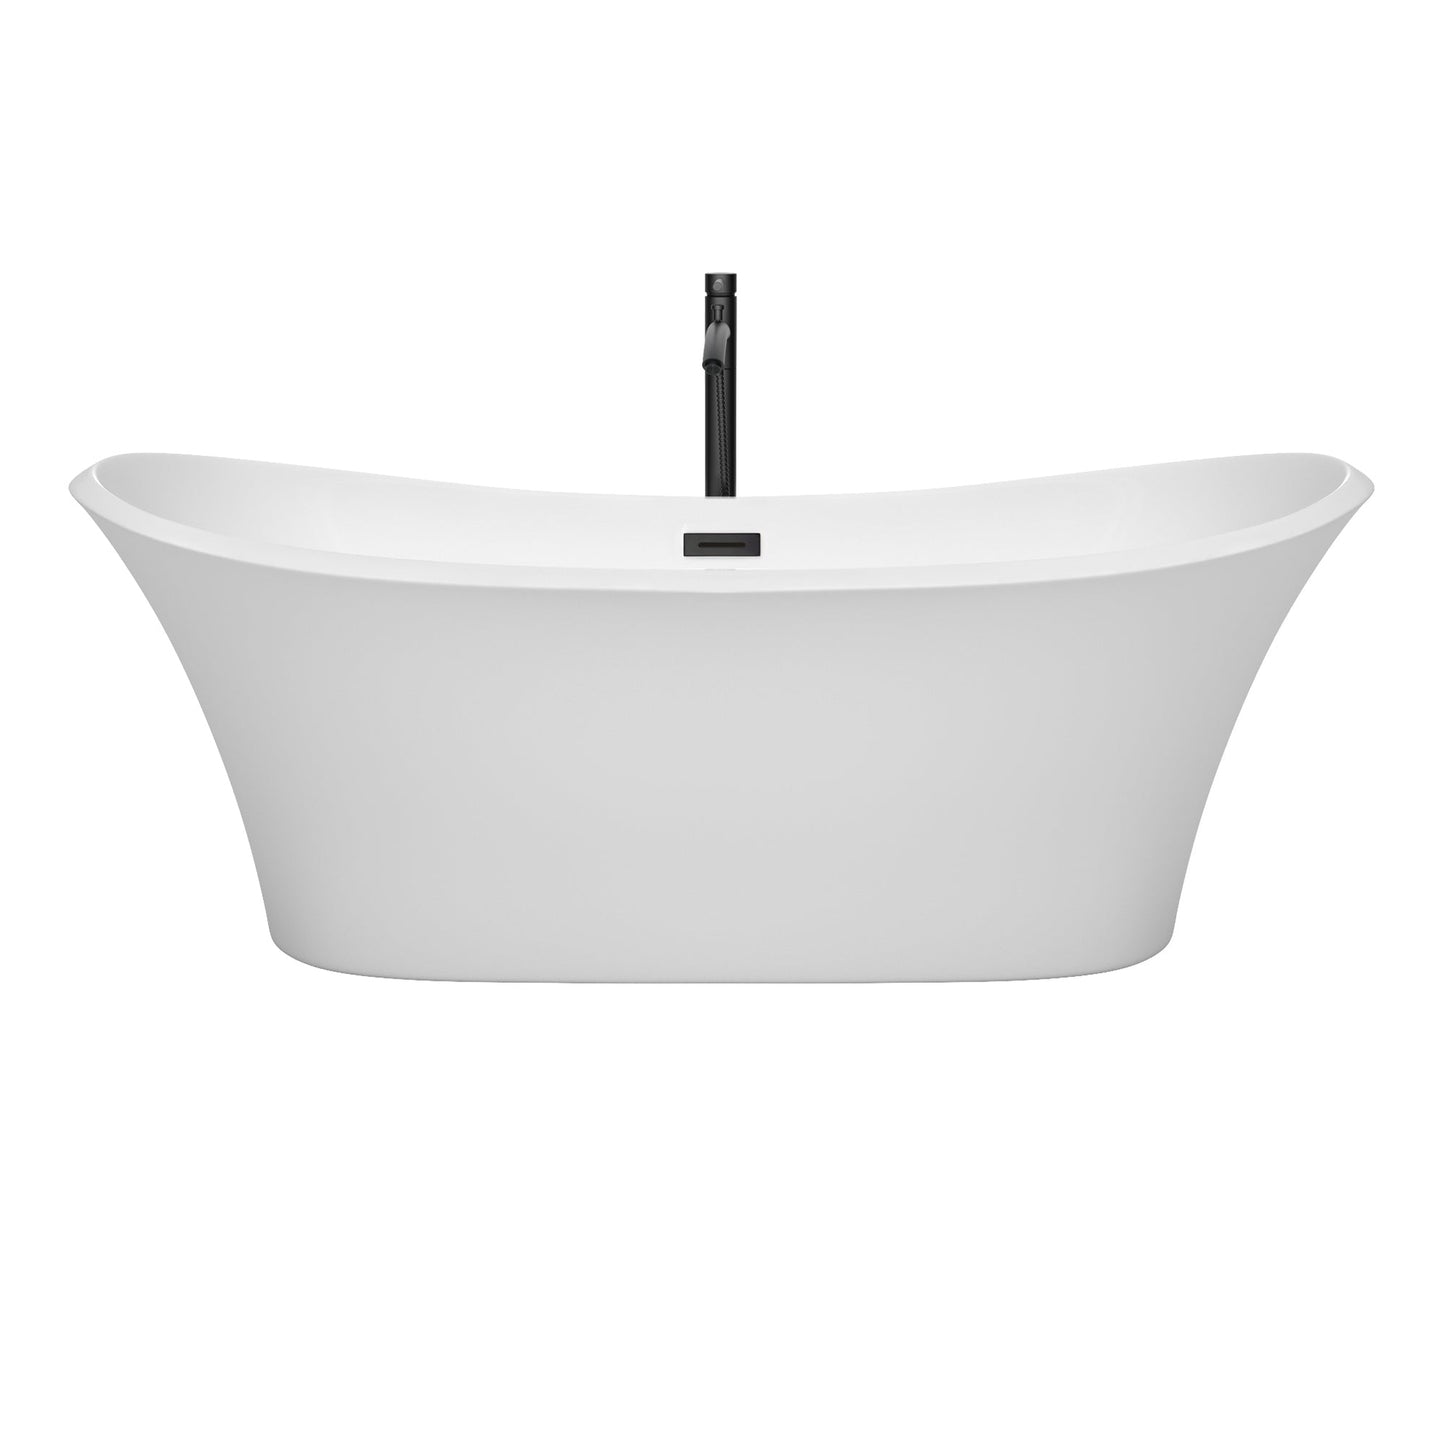 Wyndham Collection Bolera 71" Freestanding Bathtub in White With Floor Mounted Faucet, Drain and Overflow Trim in Matte Black